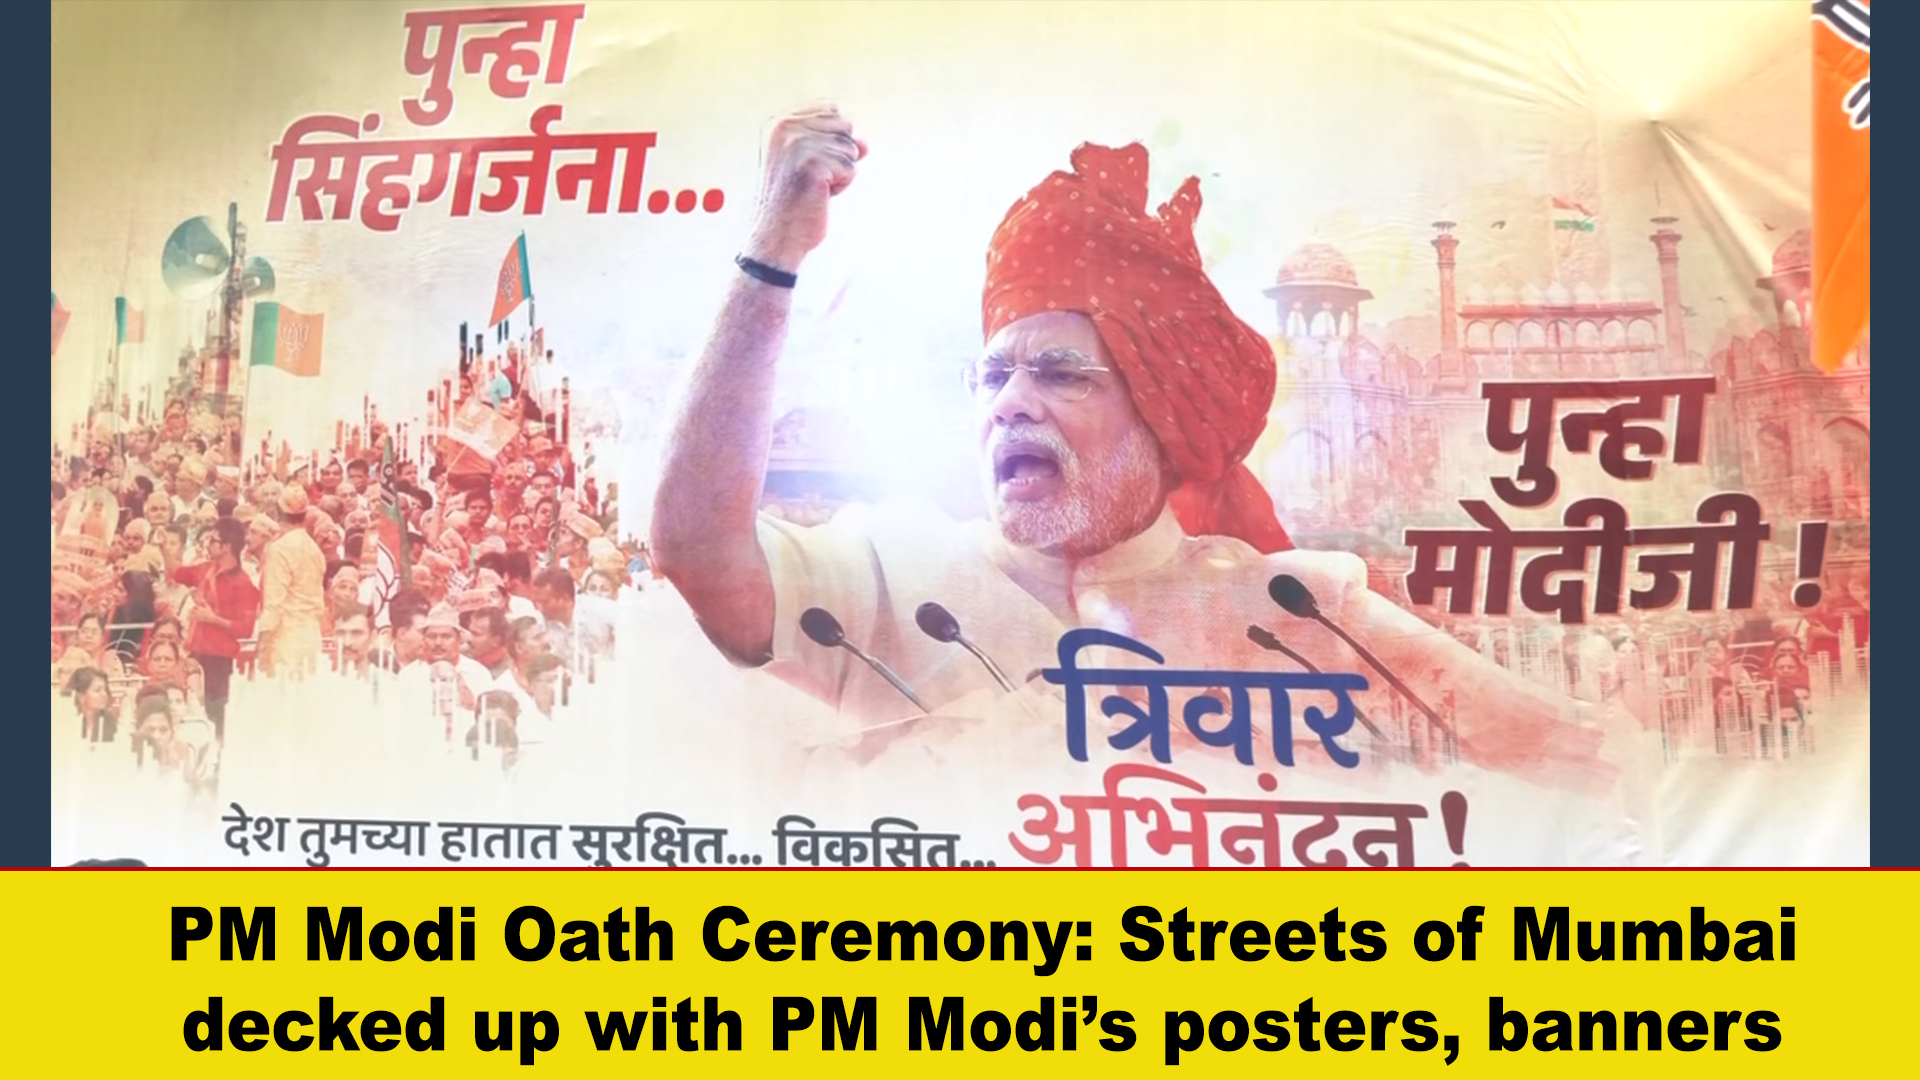 PM  Narendra Modi Oath Ceremony: Streets of Mumbai decked up with PM Modis posters, banners